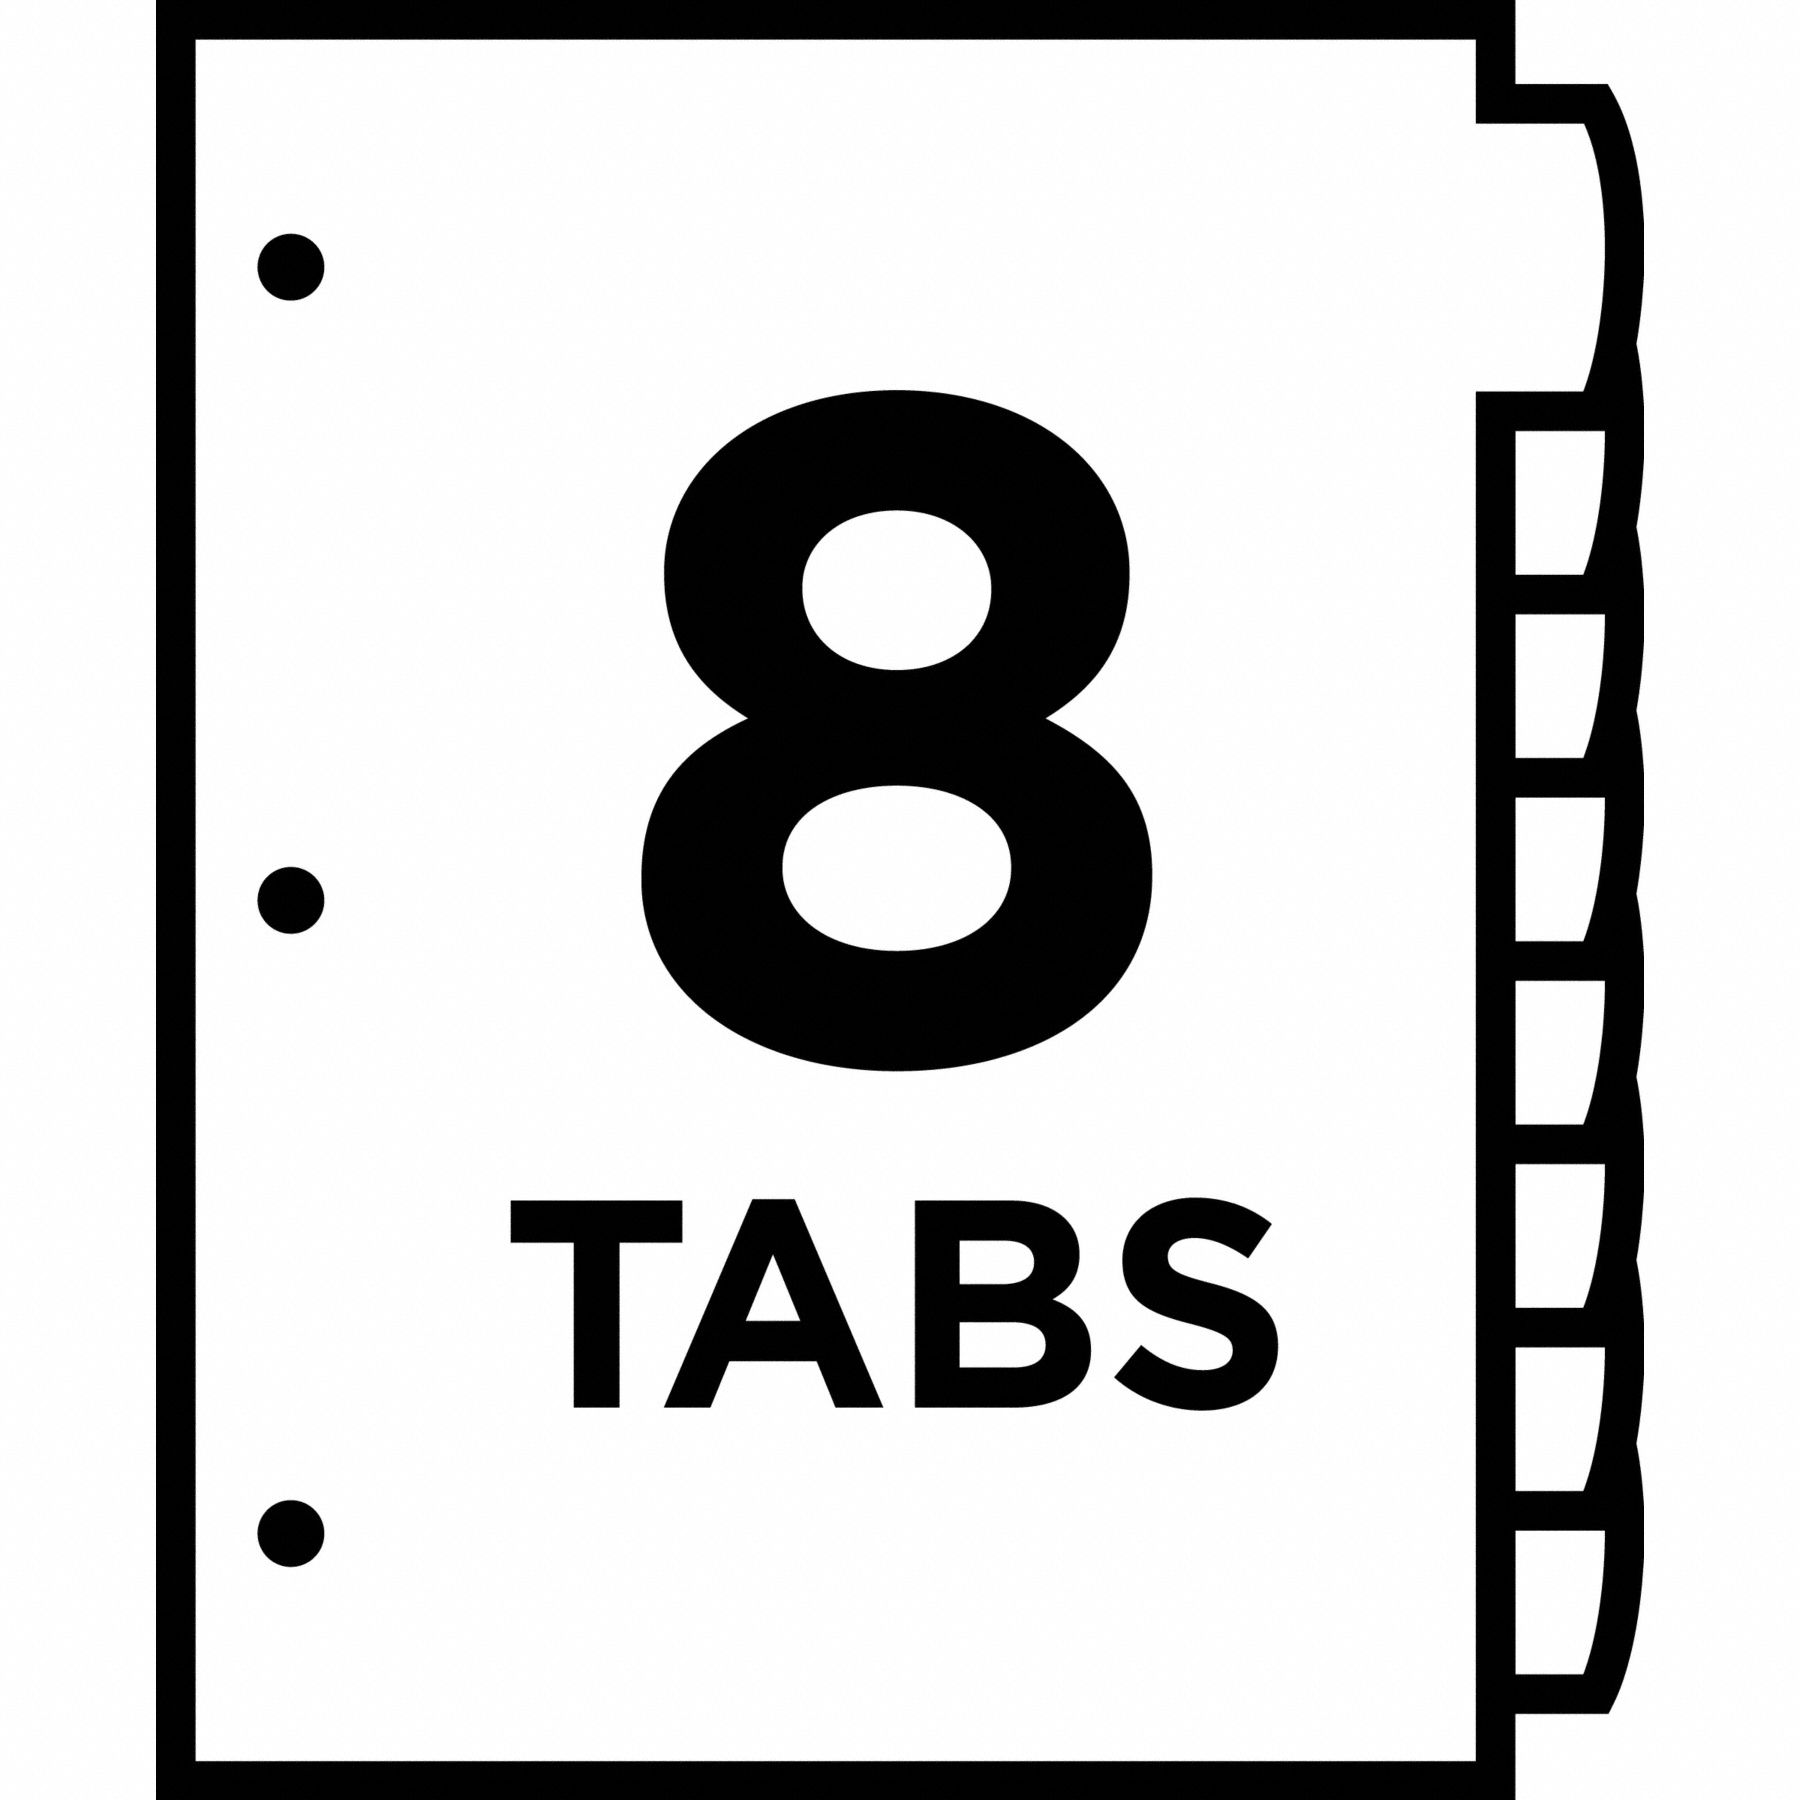 avery-binder-divider-1-to-8-tabs-white-8-tabs-11-in-ht-8-1-2-in-wd-38yv64-7278216371